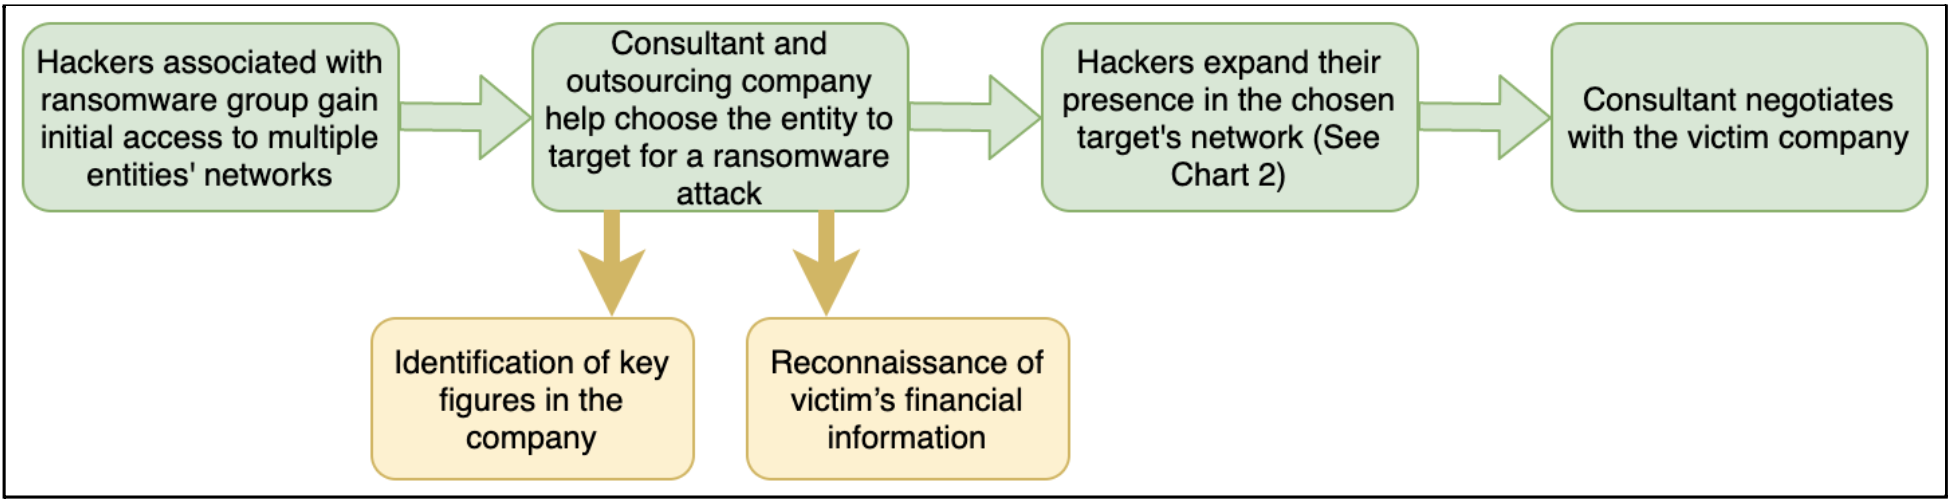 Collaboration workflow between ransomware attackers and consultants chart